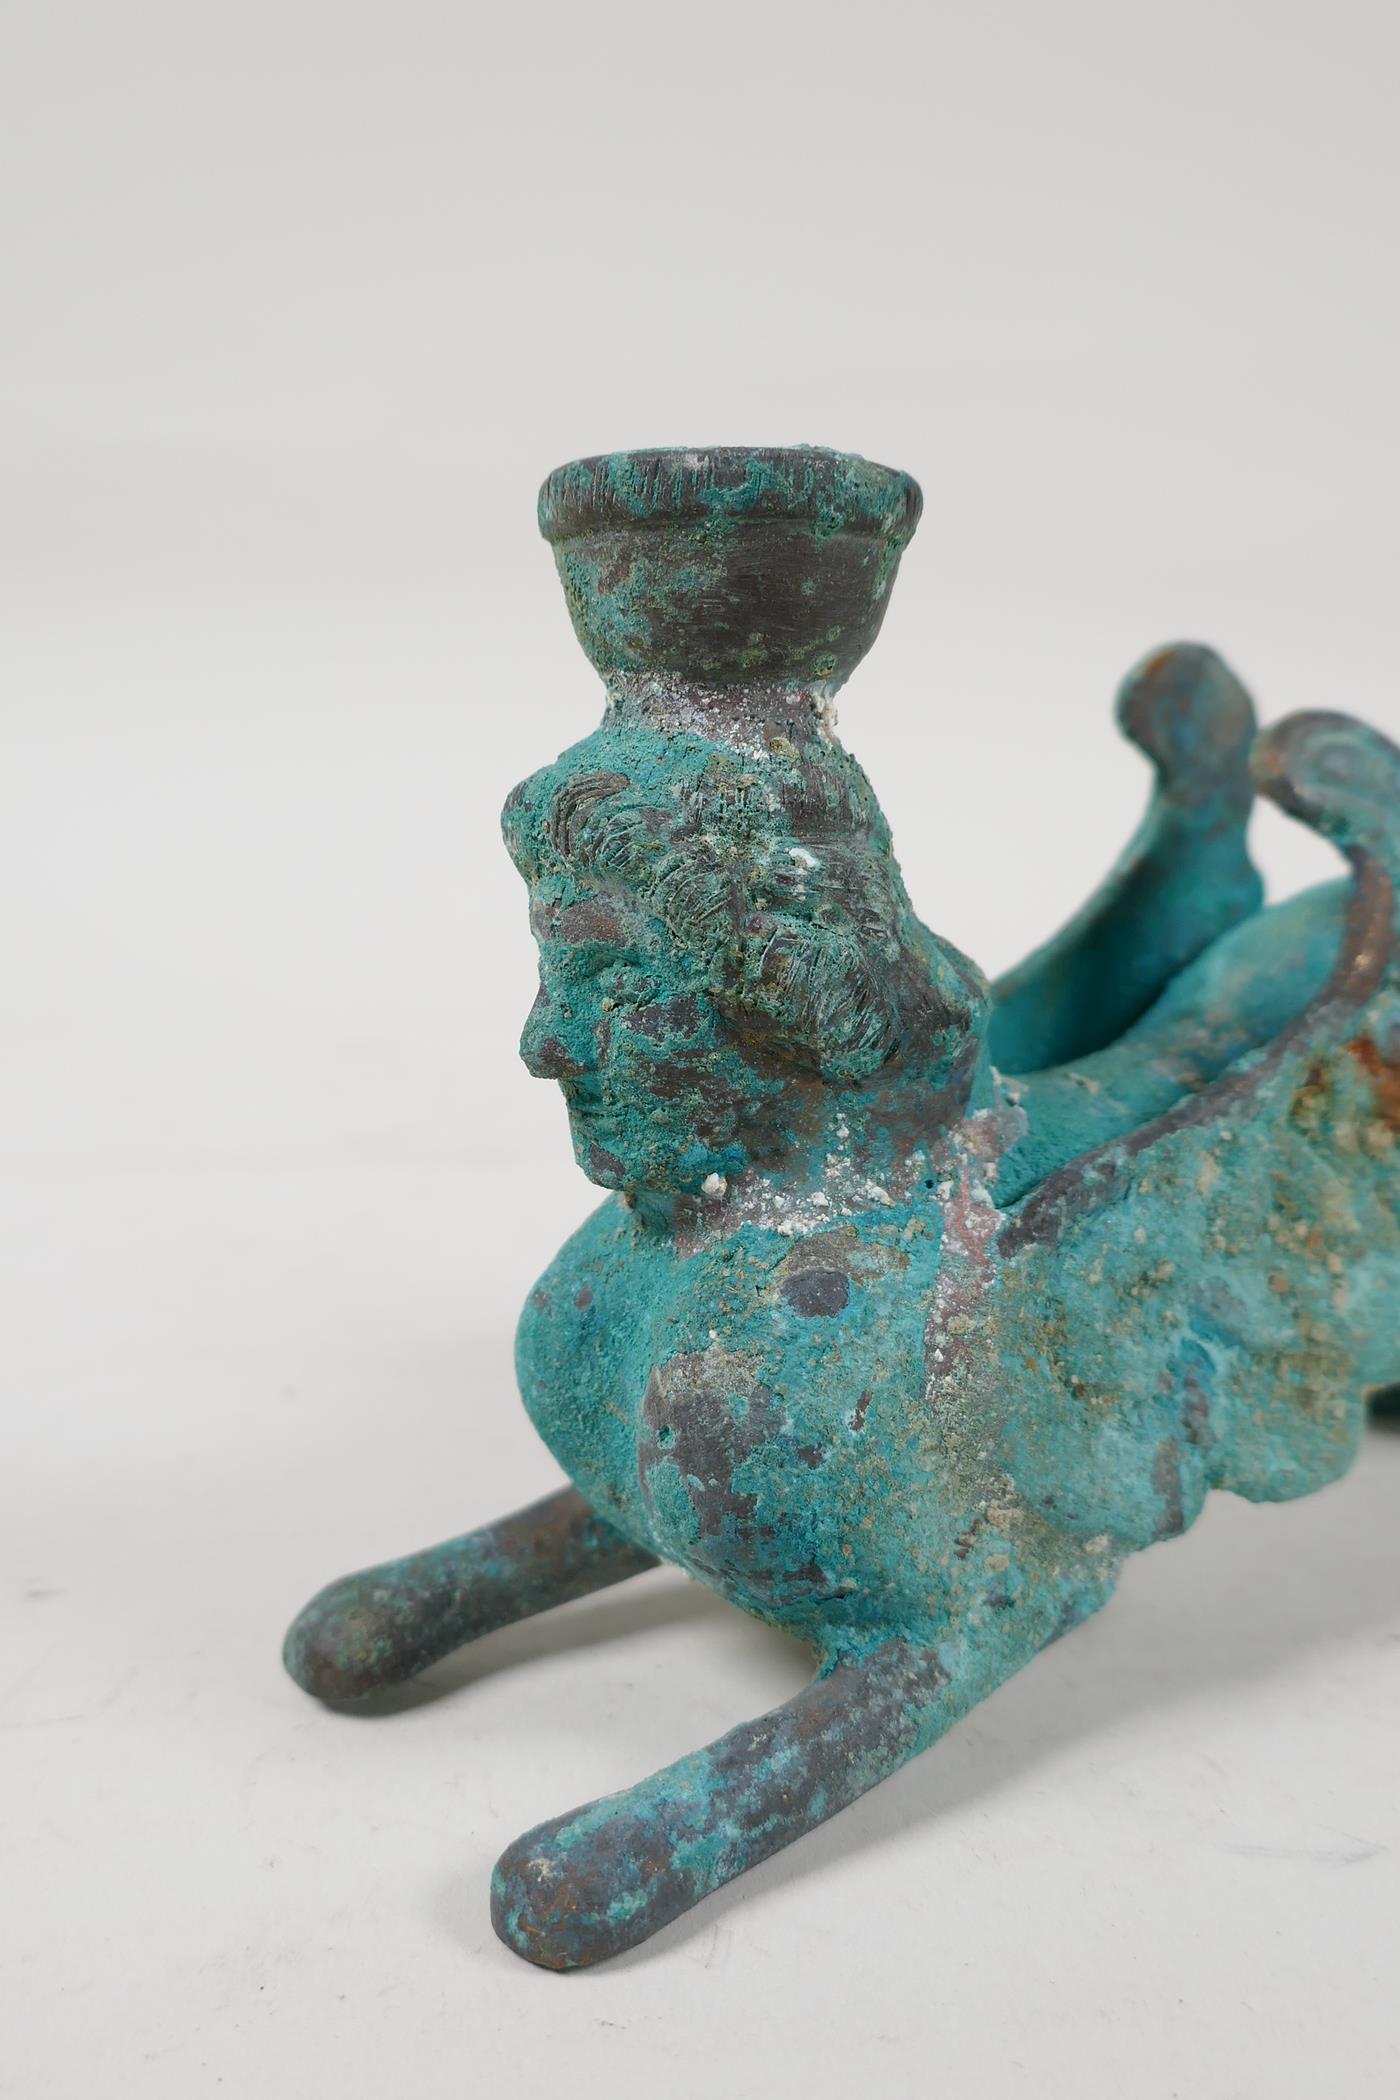 An antique bronze candlestick in the form of a Harpy, with verdigris patina, 5½" long - Image 4 of 4